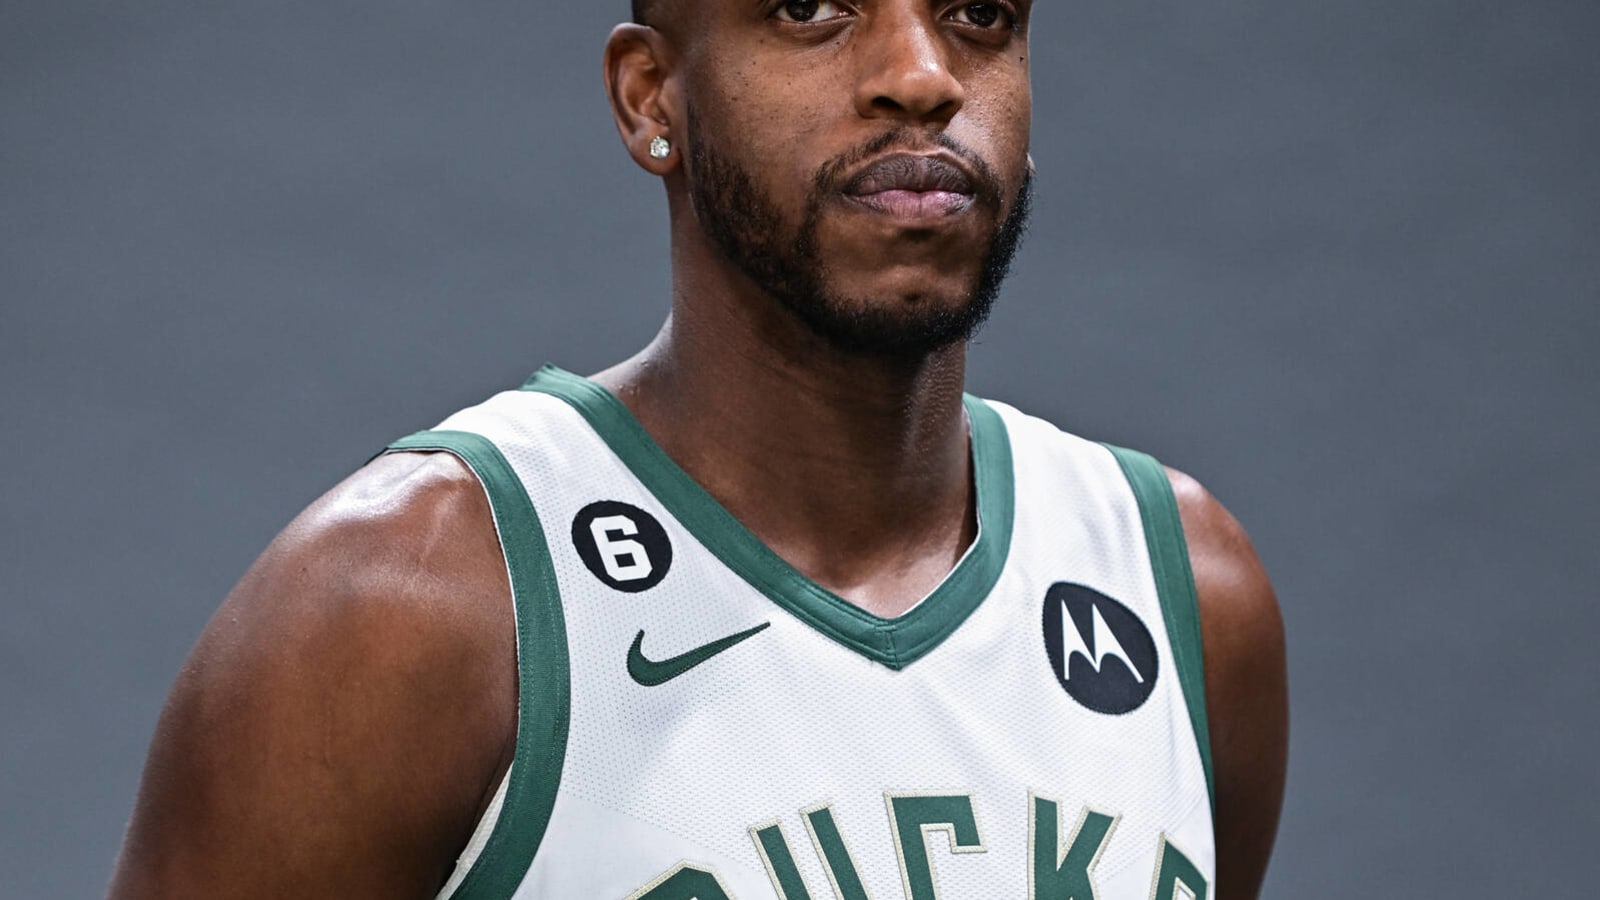 Lakers Fans Are Mad After Hearing Khris Middleton Will Make His Season Debut Against Their Team